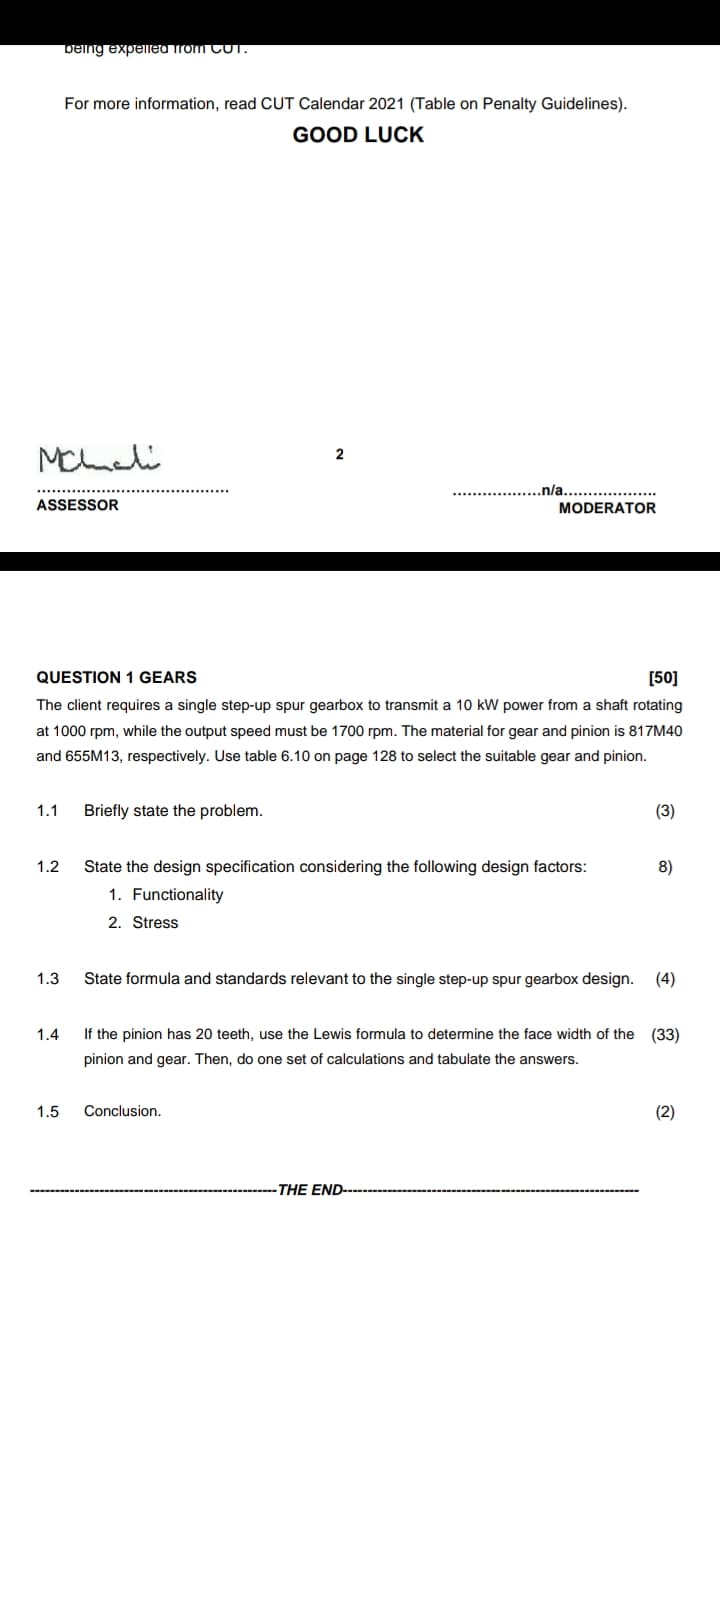 being expelled Trom CUT.
For more information, read CUT Calendar 2021 (Table on Penalty Guidelines).
GOOD LUCK
Mcheli
2
.n/a.
ASSESSOR
MODERATOR
QUESTION 1 GEARS
[50]
The client requires a single step-up spur gearbox to transmit a 10 kW power from a shaft rotating
at 1000 rpm, while the output speed must be 1700 rpm. The material for gear and pinion is 817M40
and 655M13, respectively. Use table 6.10 on page 128 to select the suitable gear and pinion.
1.1
Briefly state the problem.
(3)
1.2
State the design specification considering the following design factors:
8)
1. Functionality
2. Stress
1.3
State formula and standards relevant to the single step-up spur gearbox design.
(4)
1.4
If the pinion has 20 teeth, use the Lewis formula to determine the face width of the (33)
pinion and gear. Then, do one set of calculations and tabulate the answers.
1.5
Conclusion.
(2)
-THE END--
